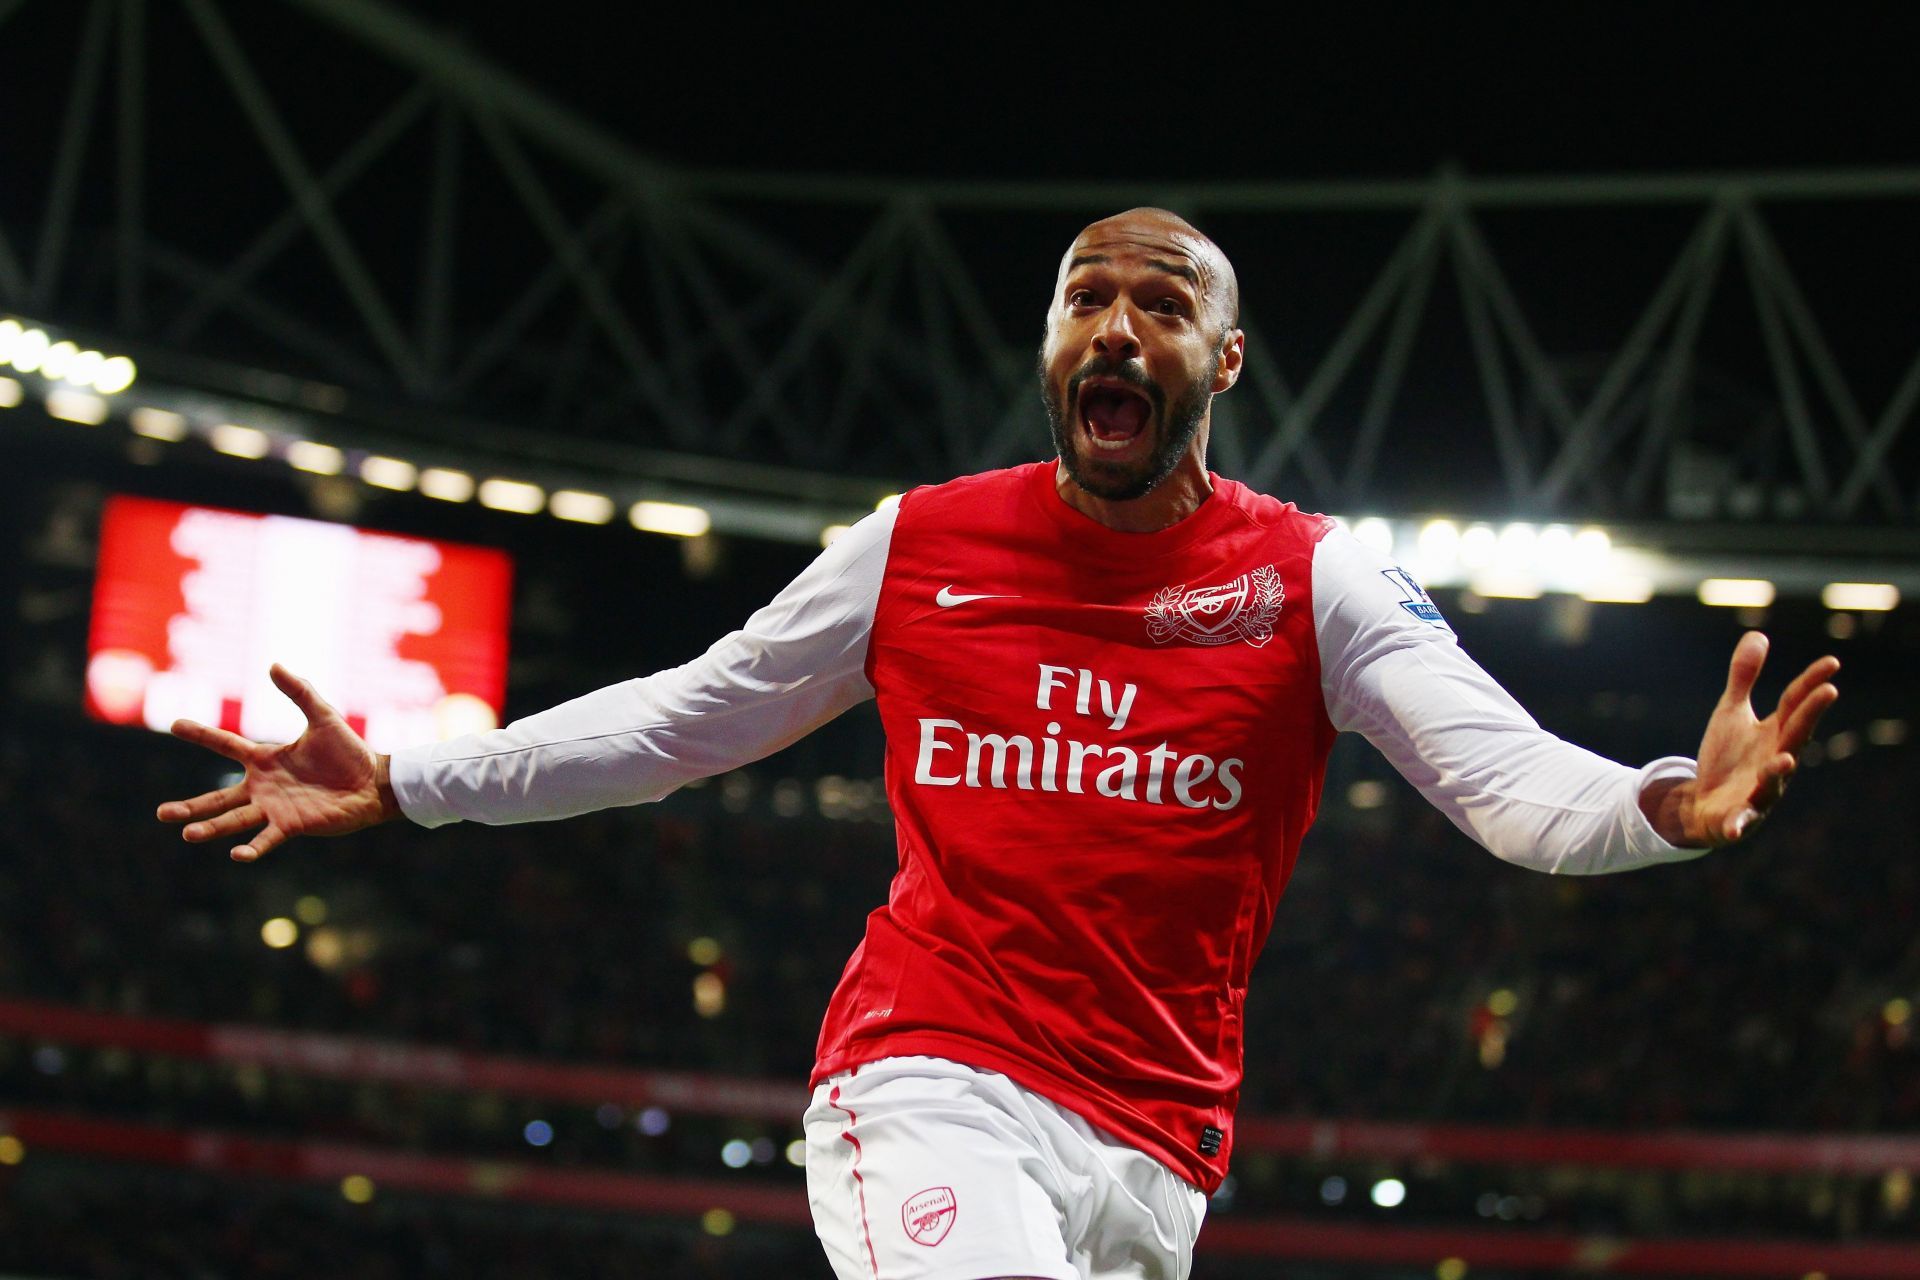 Thierry Henry is among the greatest ever Premier League players